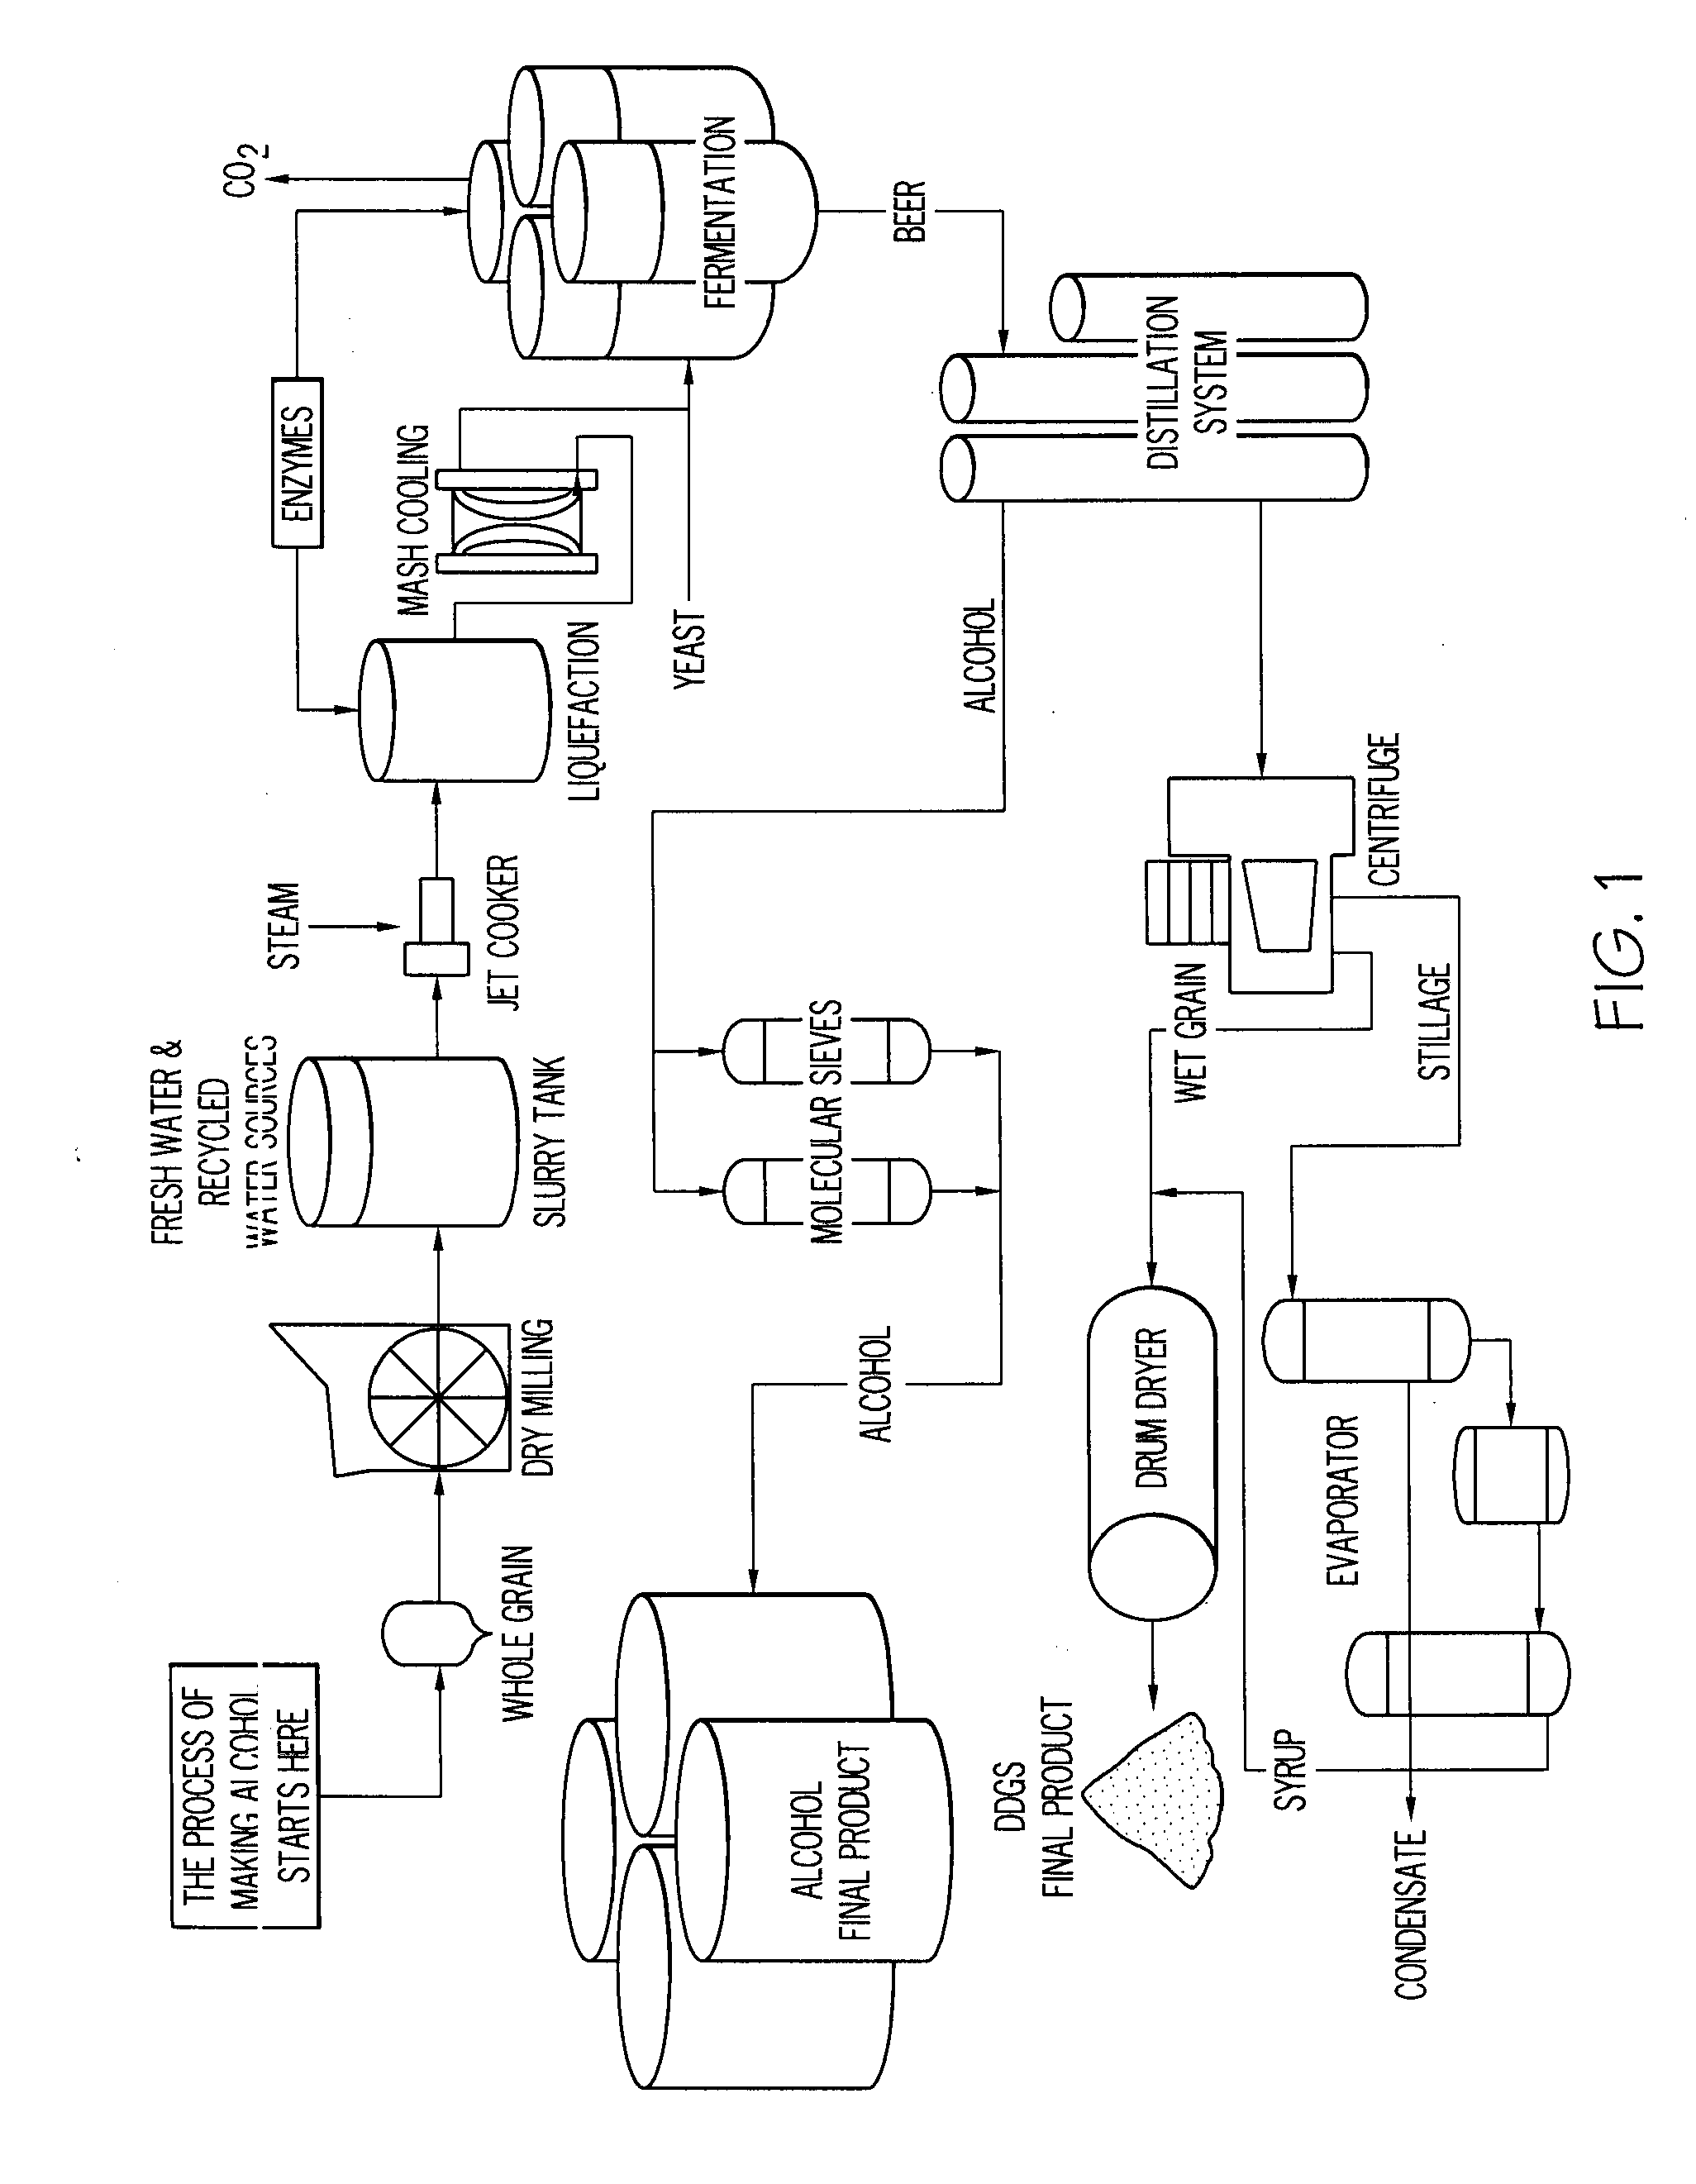 Apparatus & method for increasing alcohol yield from grain